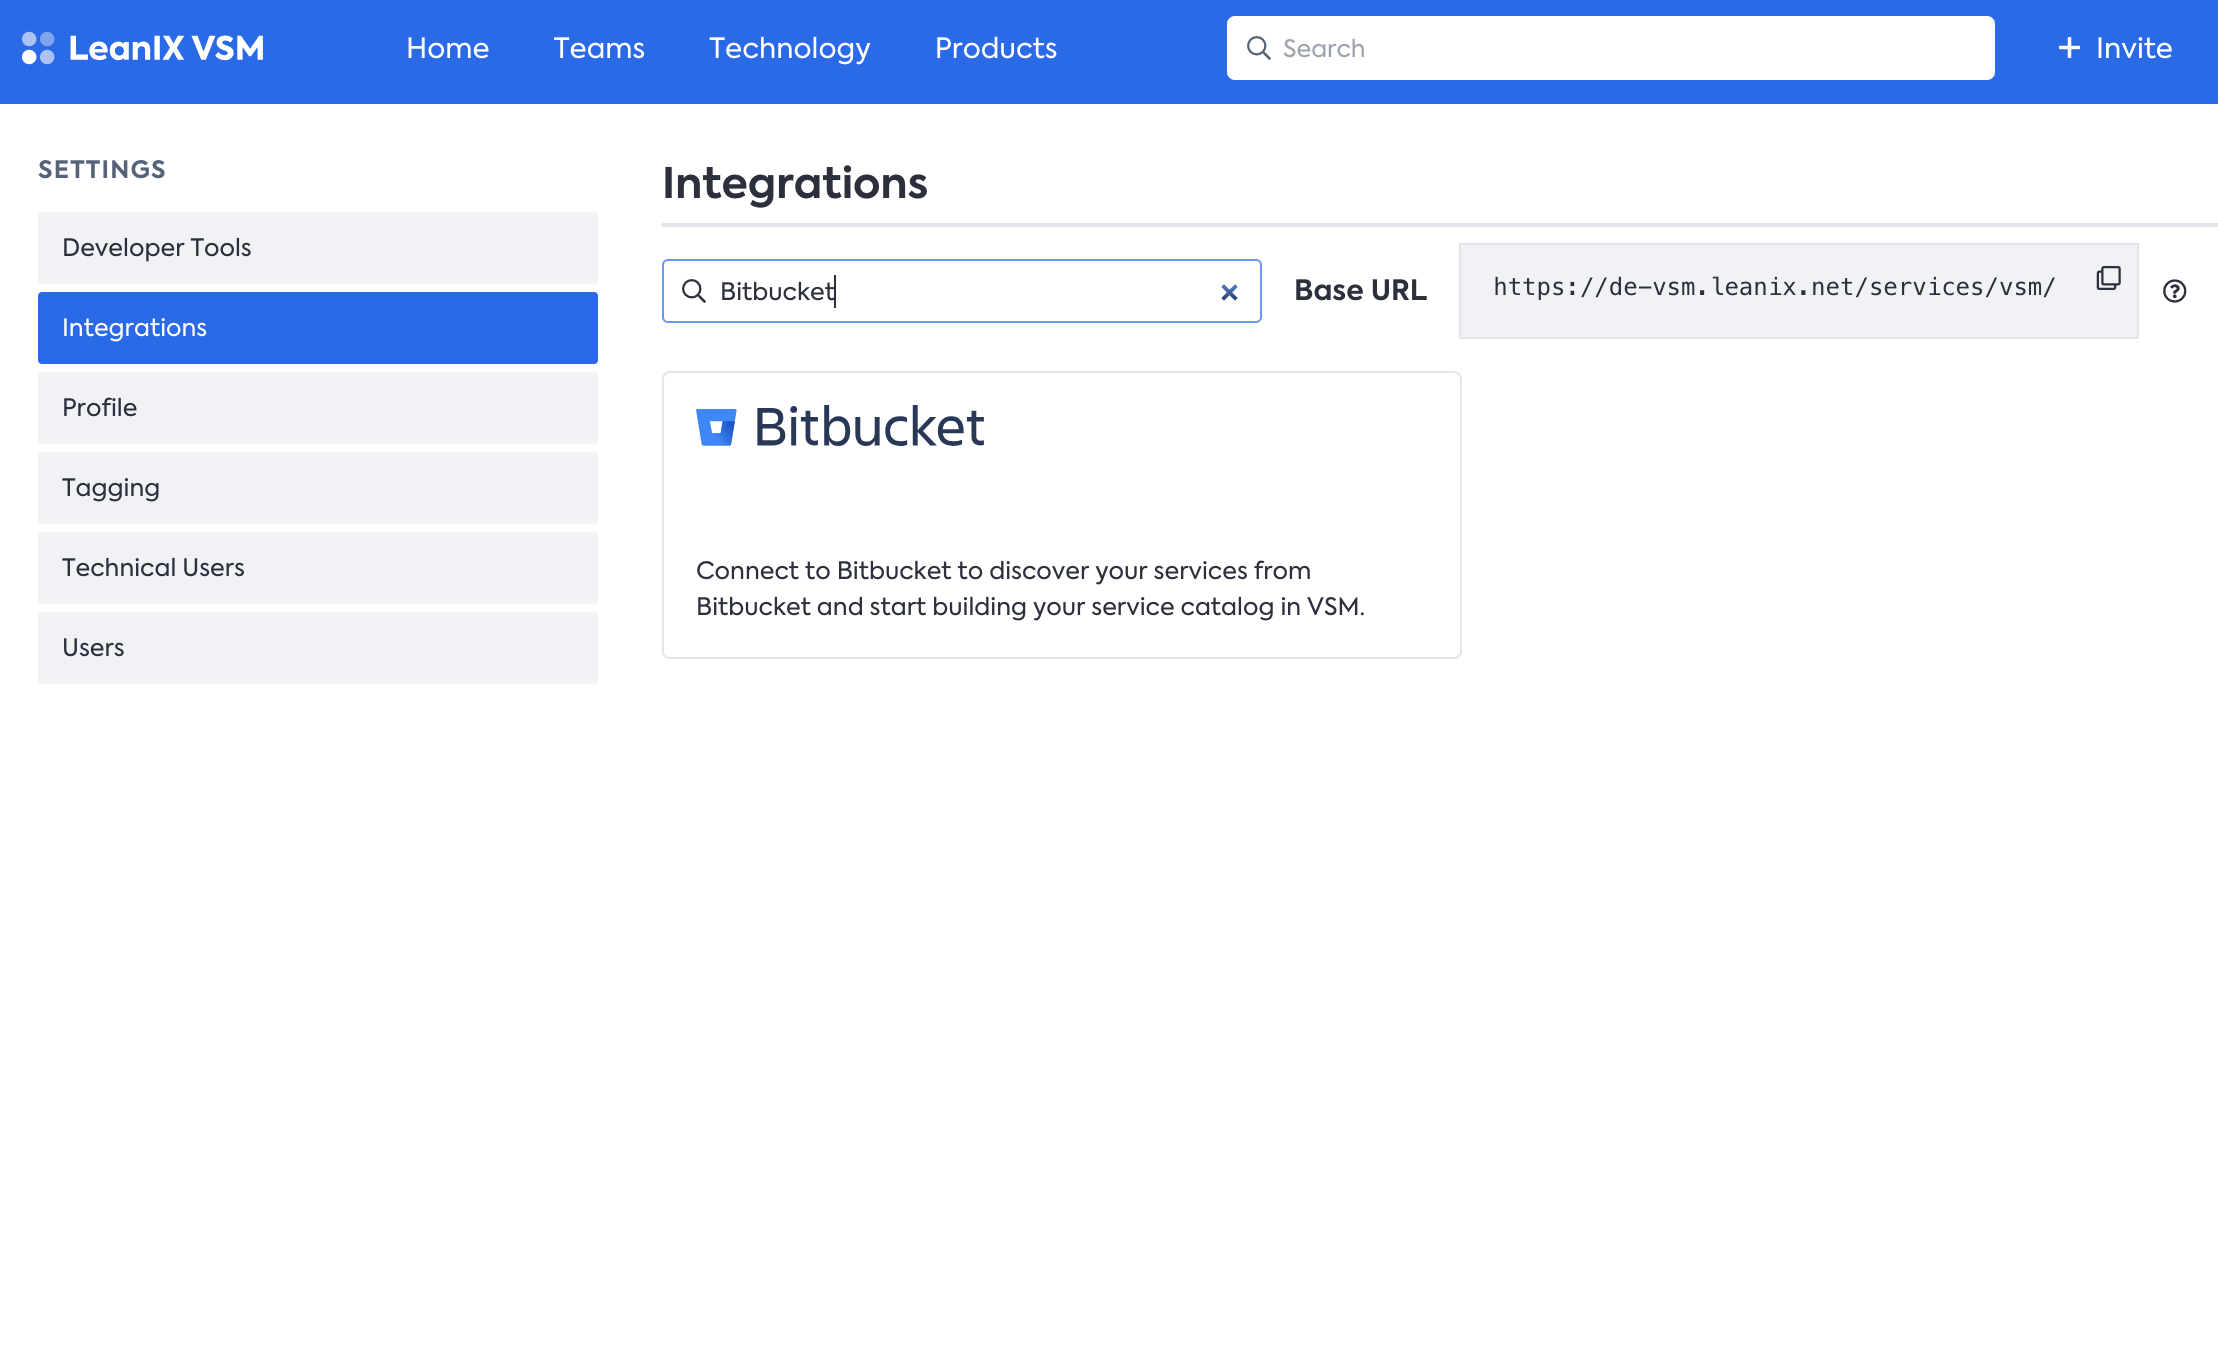 Bitbucket Repository Integration setup in the Integrations page